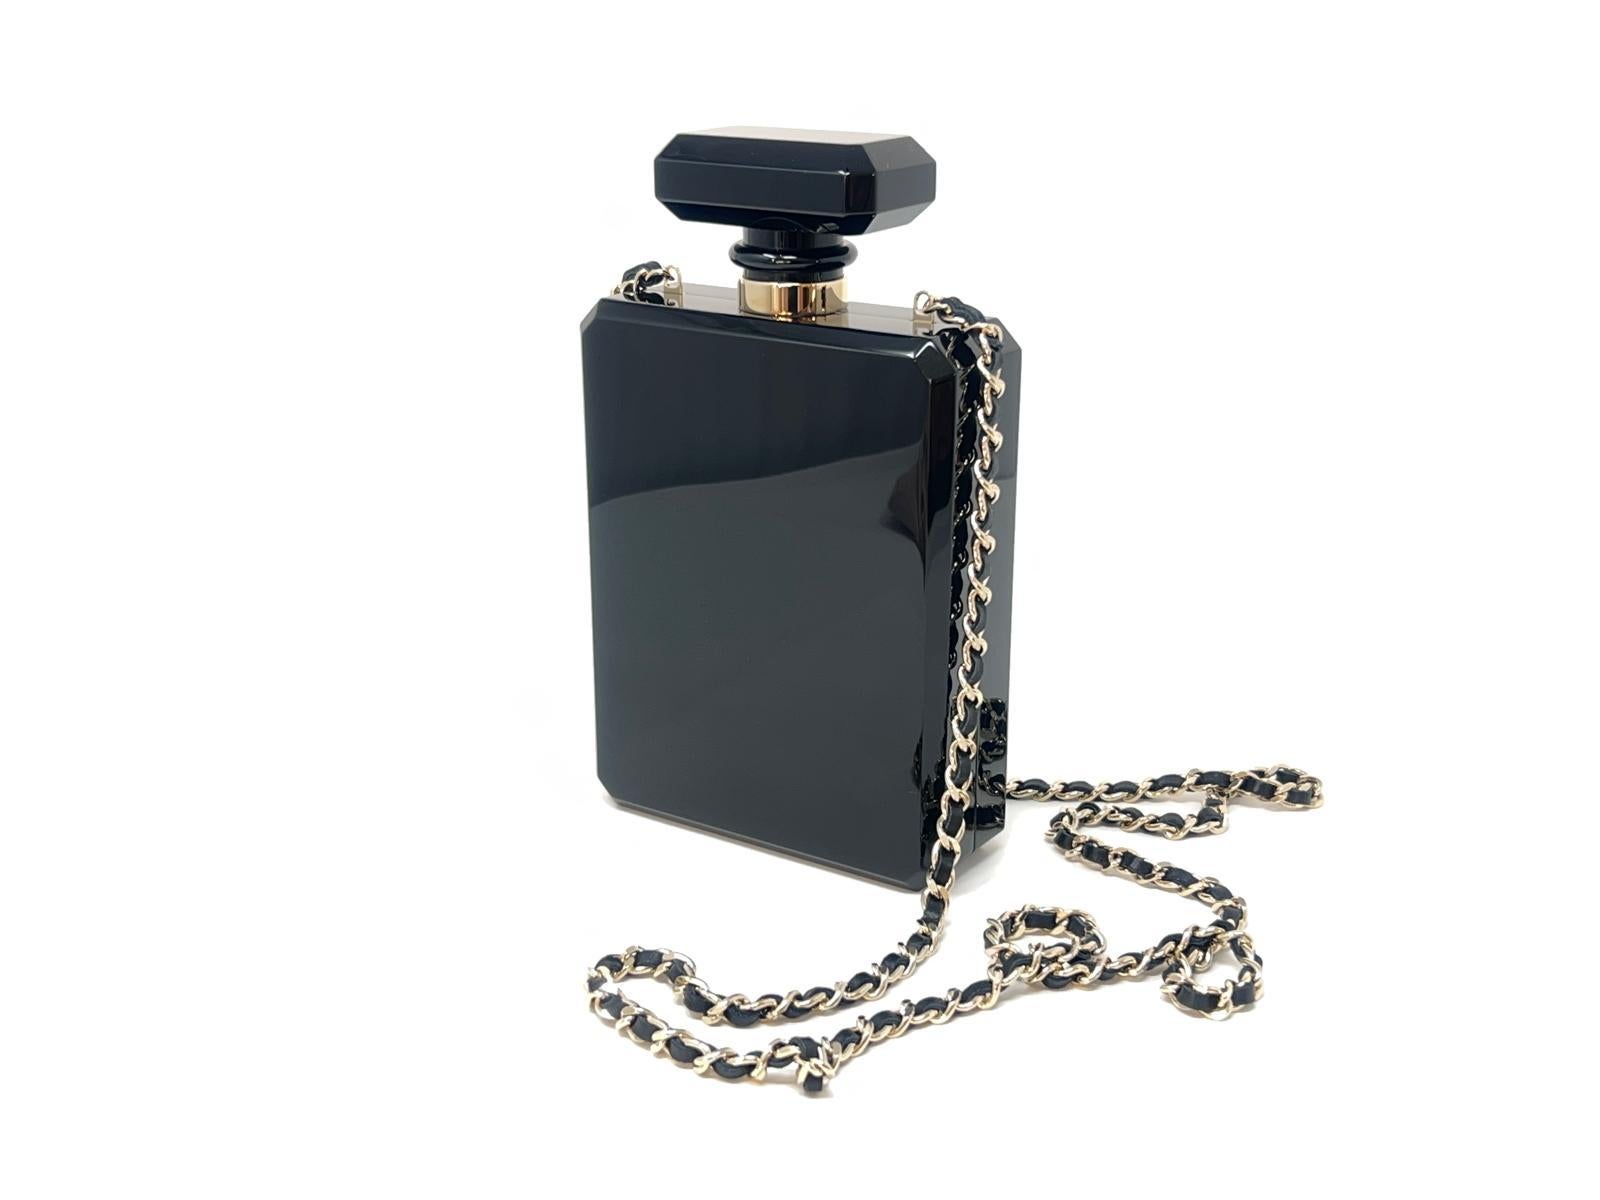 Chanel N5 Black Perfume Bottle Minaudière Cruise Collection 2013  For Sale 10